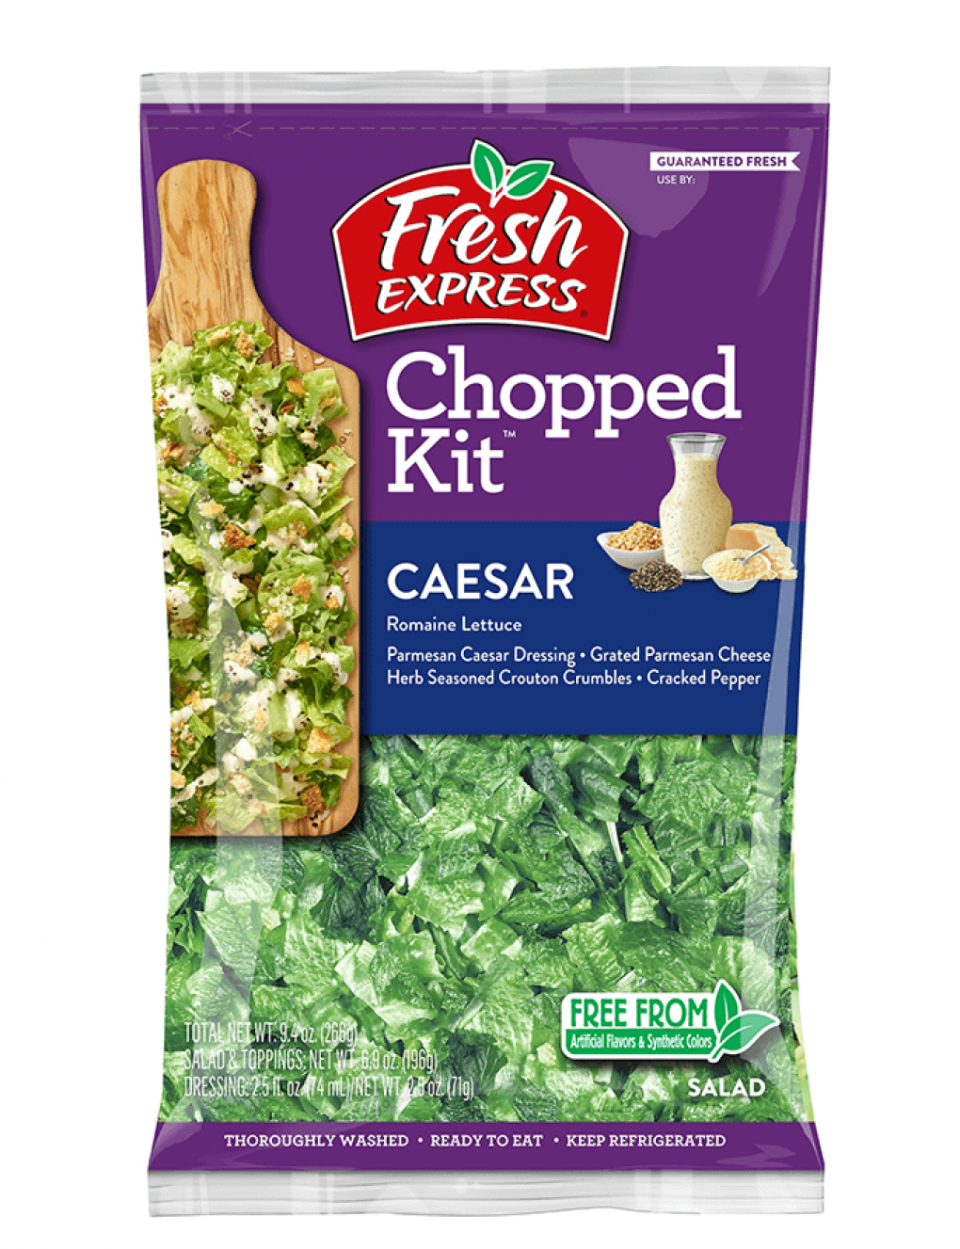 Fresh Express Incorporated is voluntarily recalling a limited quantity of three varieties of already-expired branded and private label salad kit products produced at the company’s Morrow, Georgia facility out of an abundance of caution due to a possible health risk from Listeria monocytogenes.